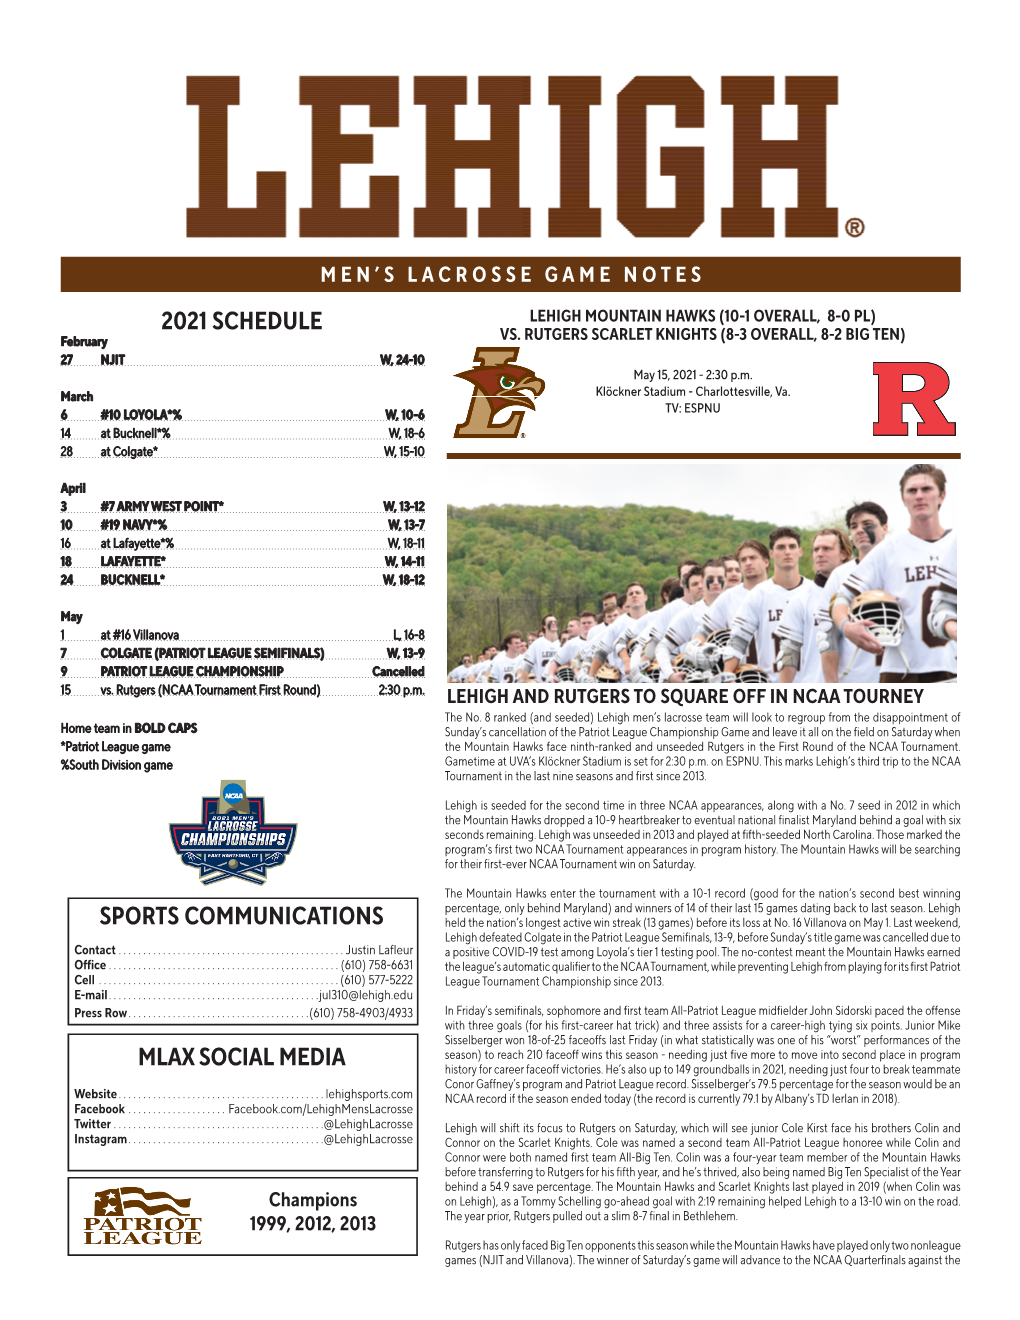 2021 Schedule Sports Communications Mlax Social